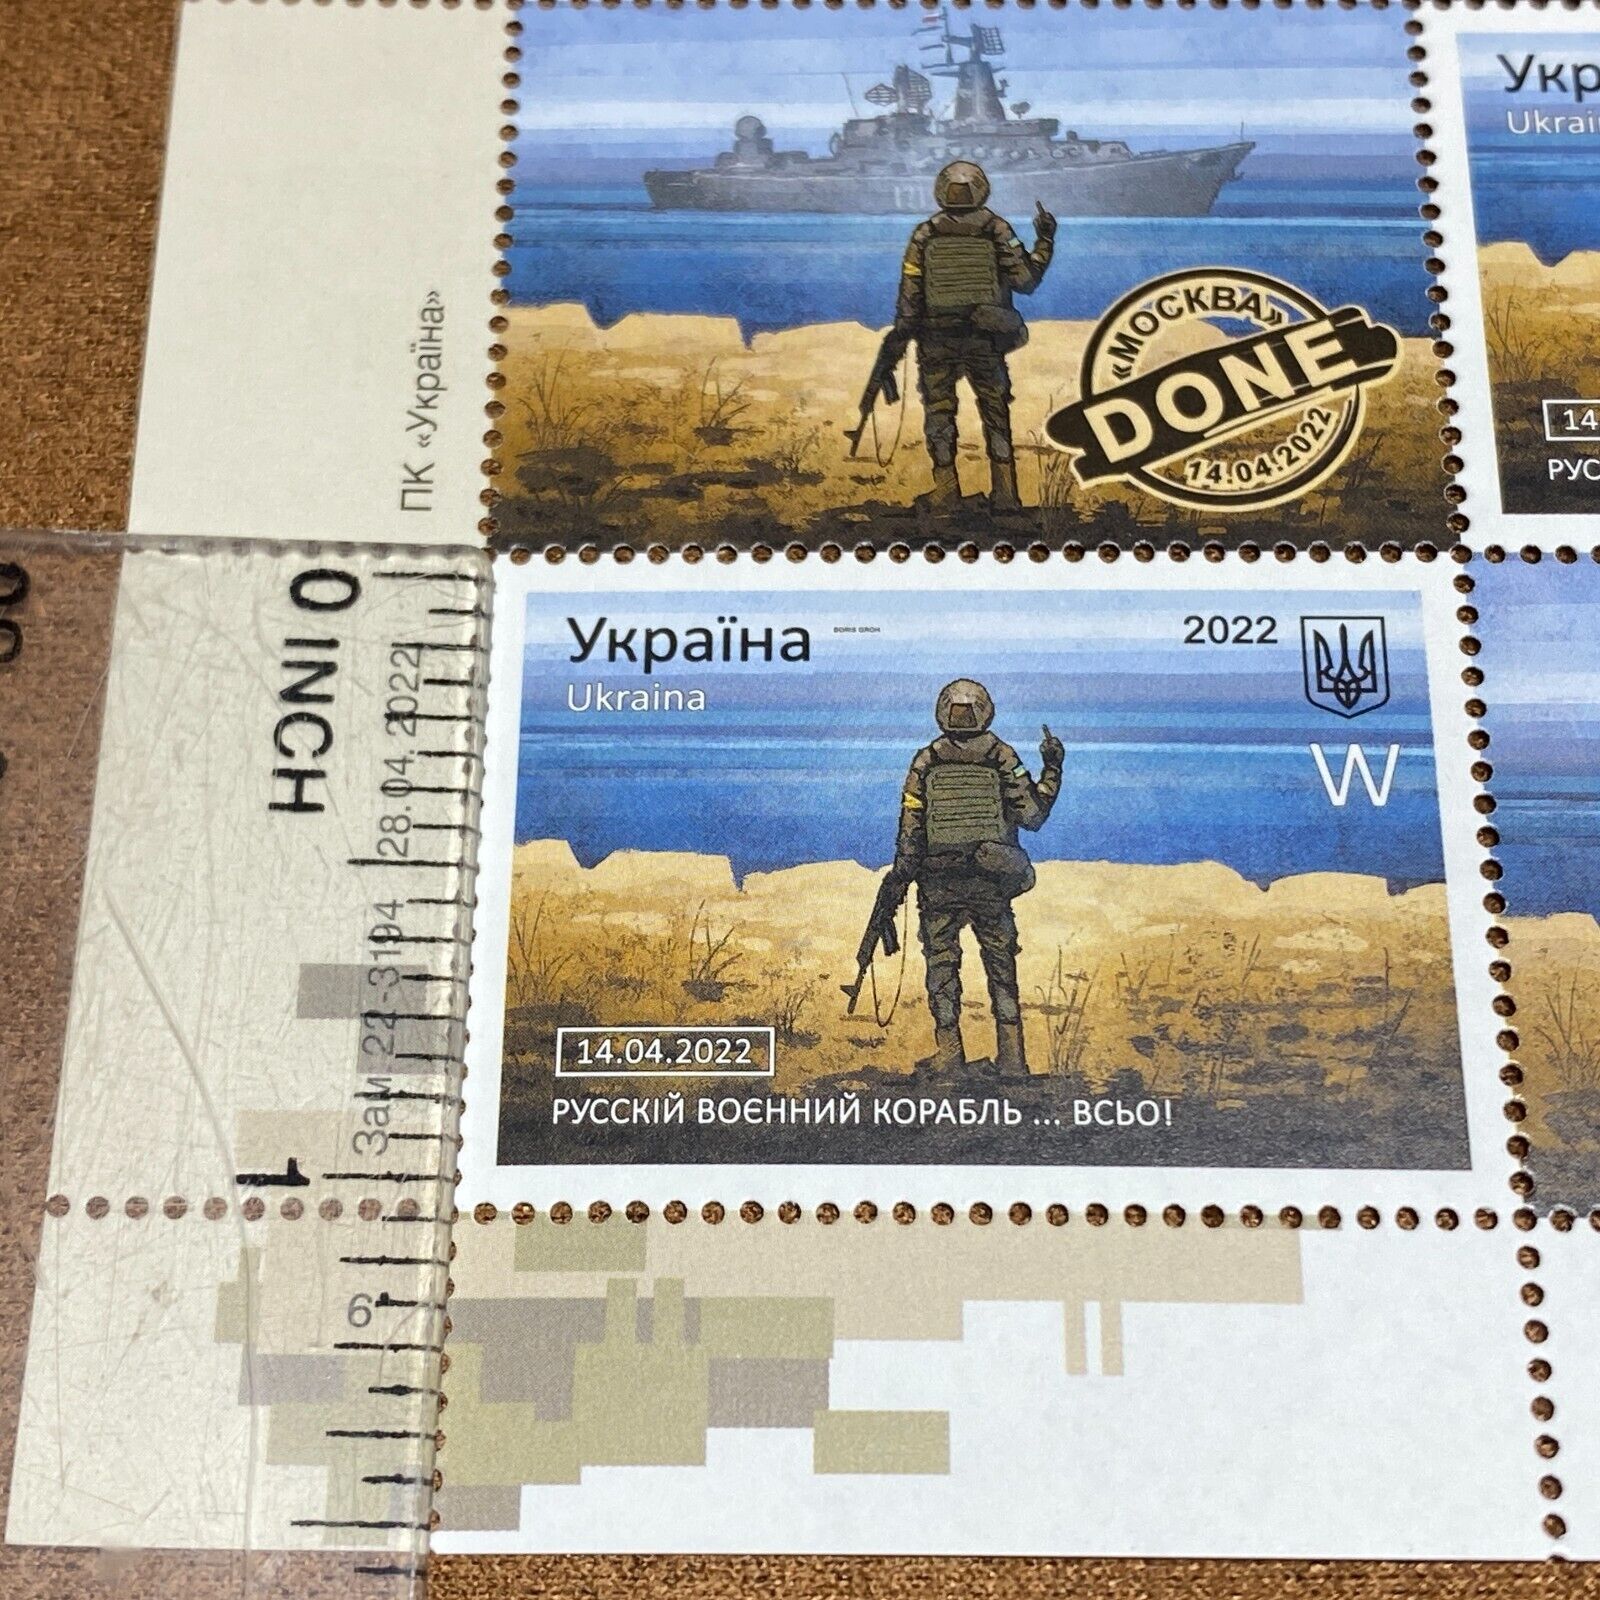 Limited Ukraine Stamps Russian Warship... DONE! ✅ Full Sheet Stamps Ukraine "W"